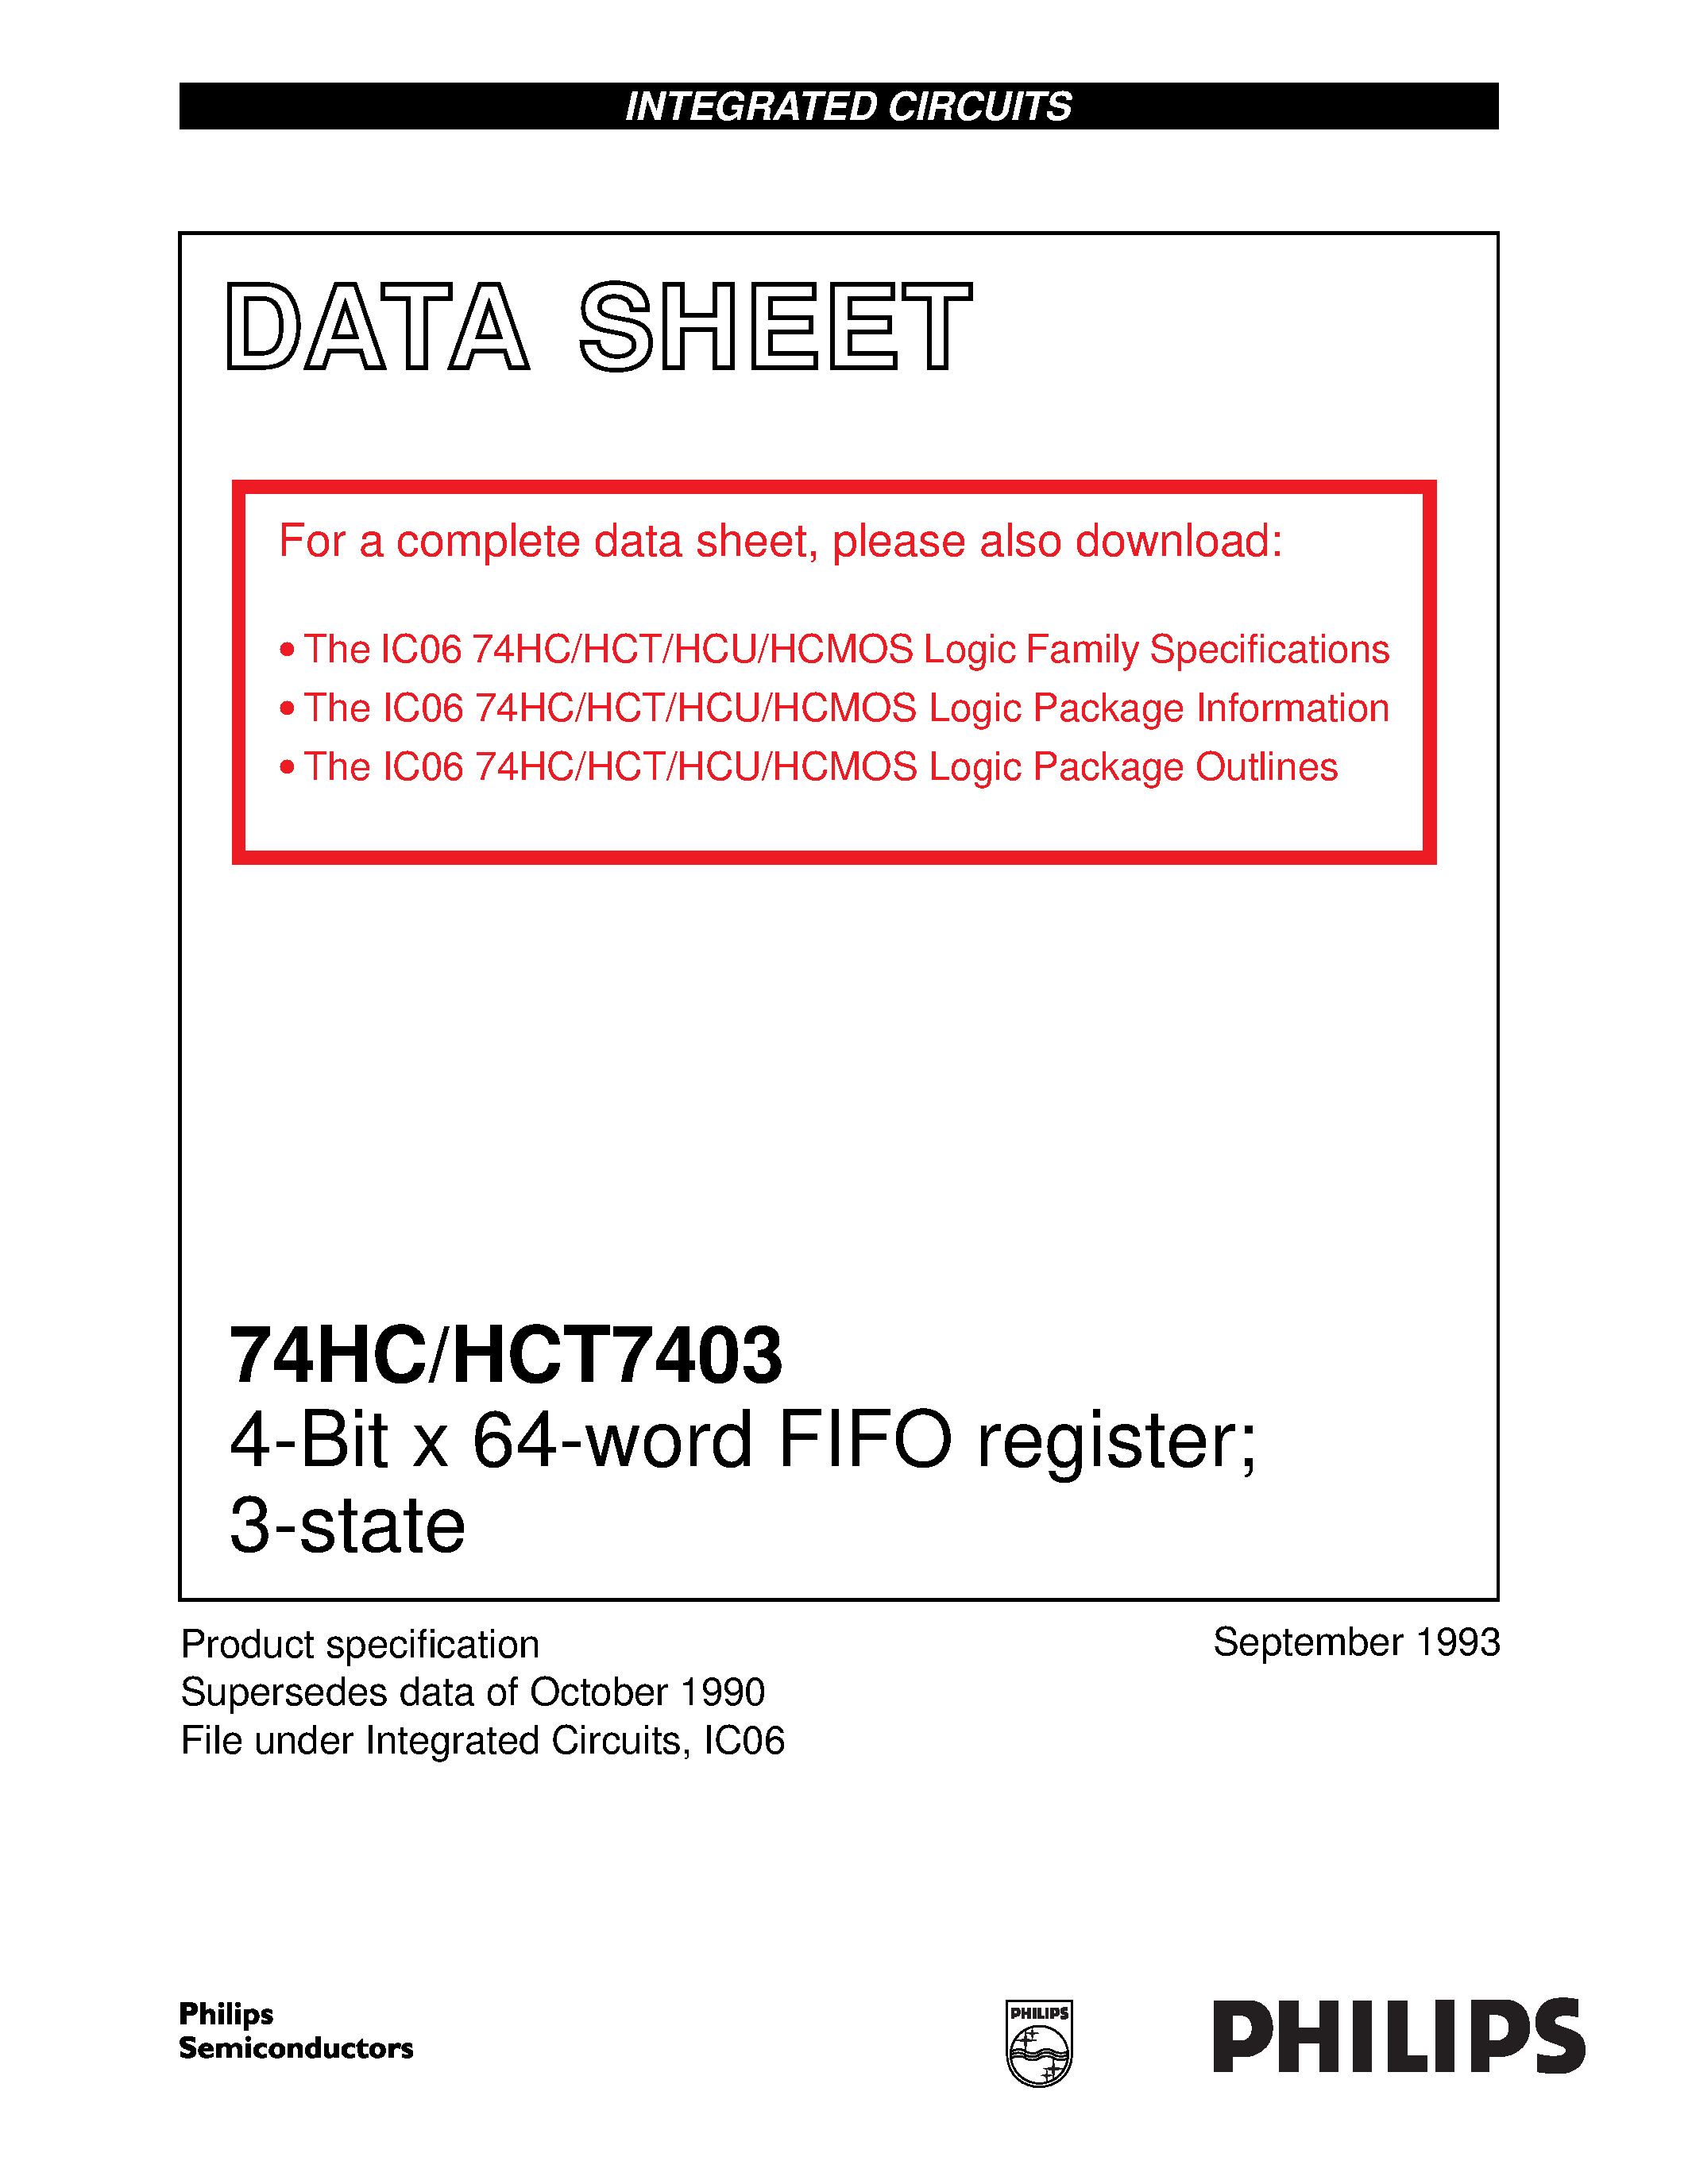 Datasheet 74HCT7403N - 4-Bit x 64-word FIFO register; 3-state page 1